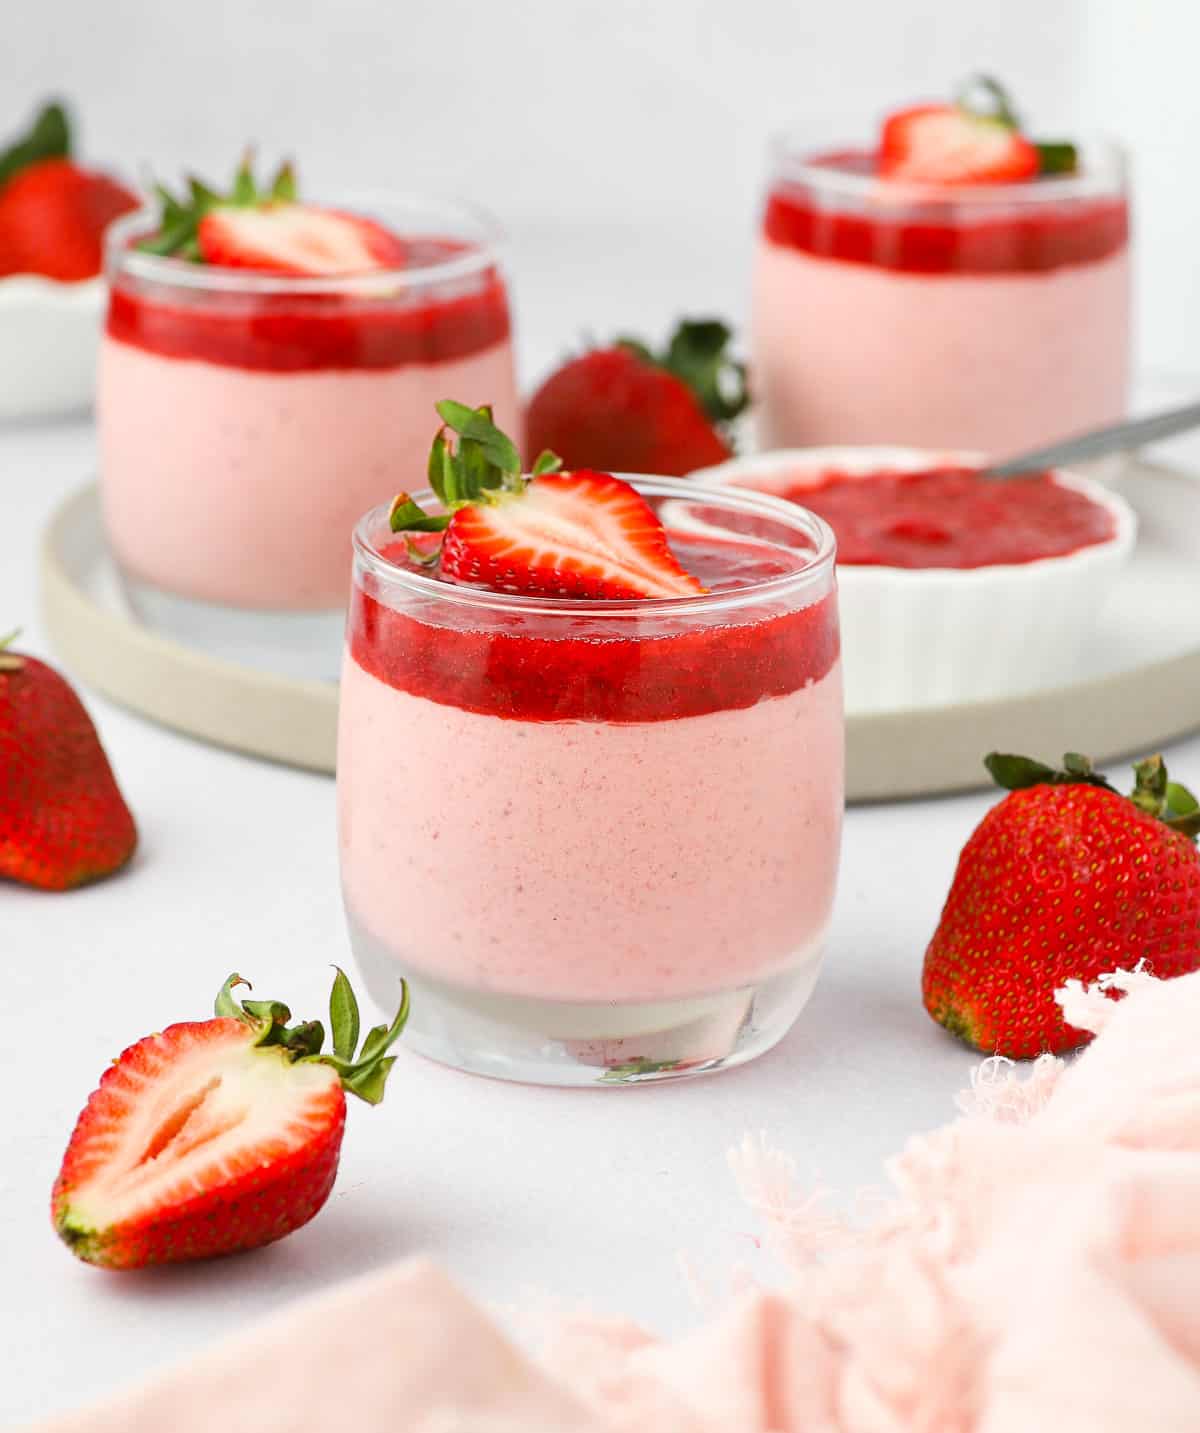 Front view of the dessert in a glass cup surrounded by fresh strawberries.